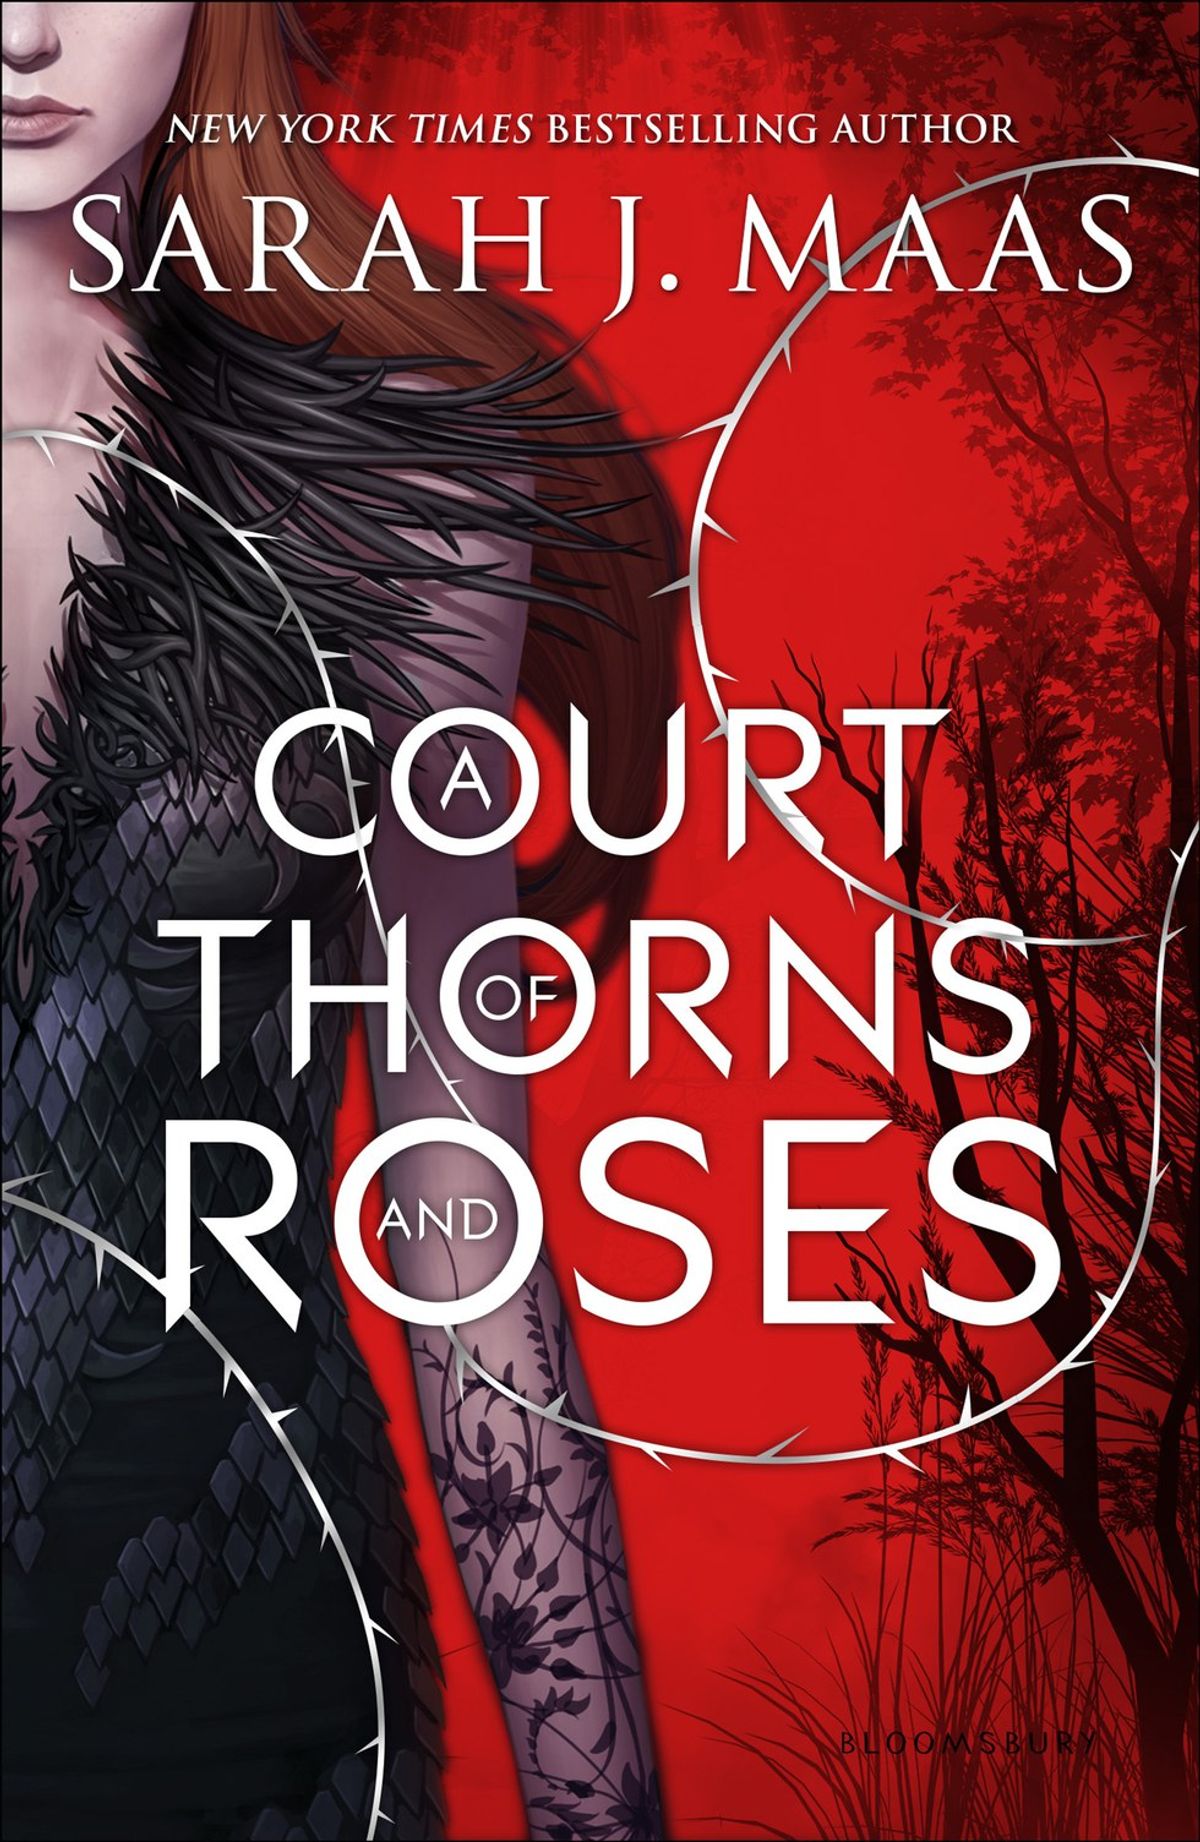 Book Review - A Court of Thorns and Roses